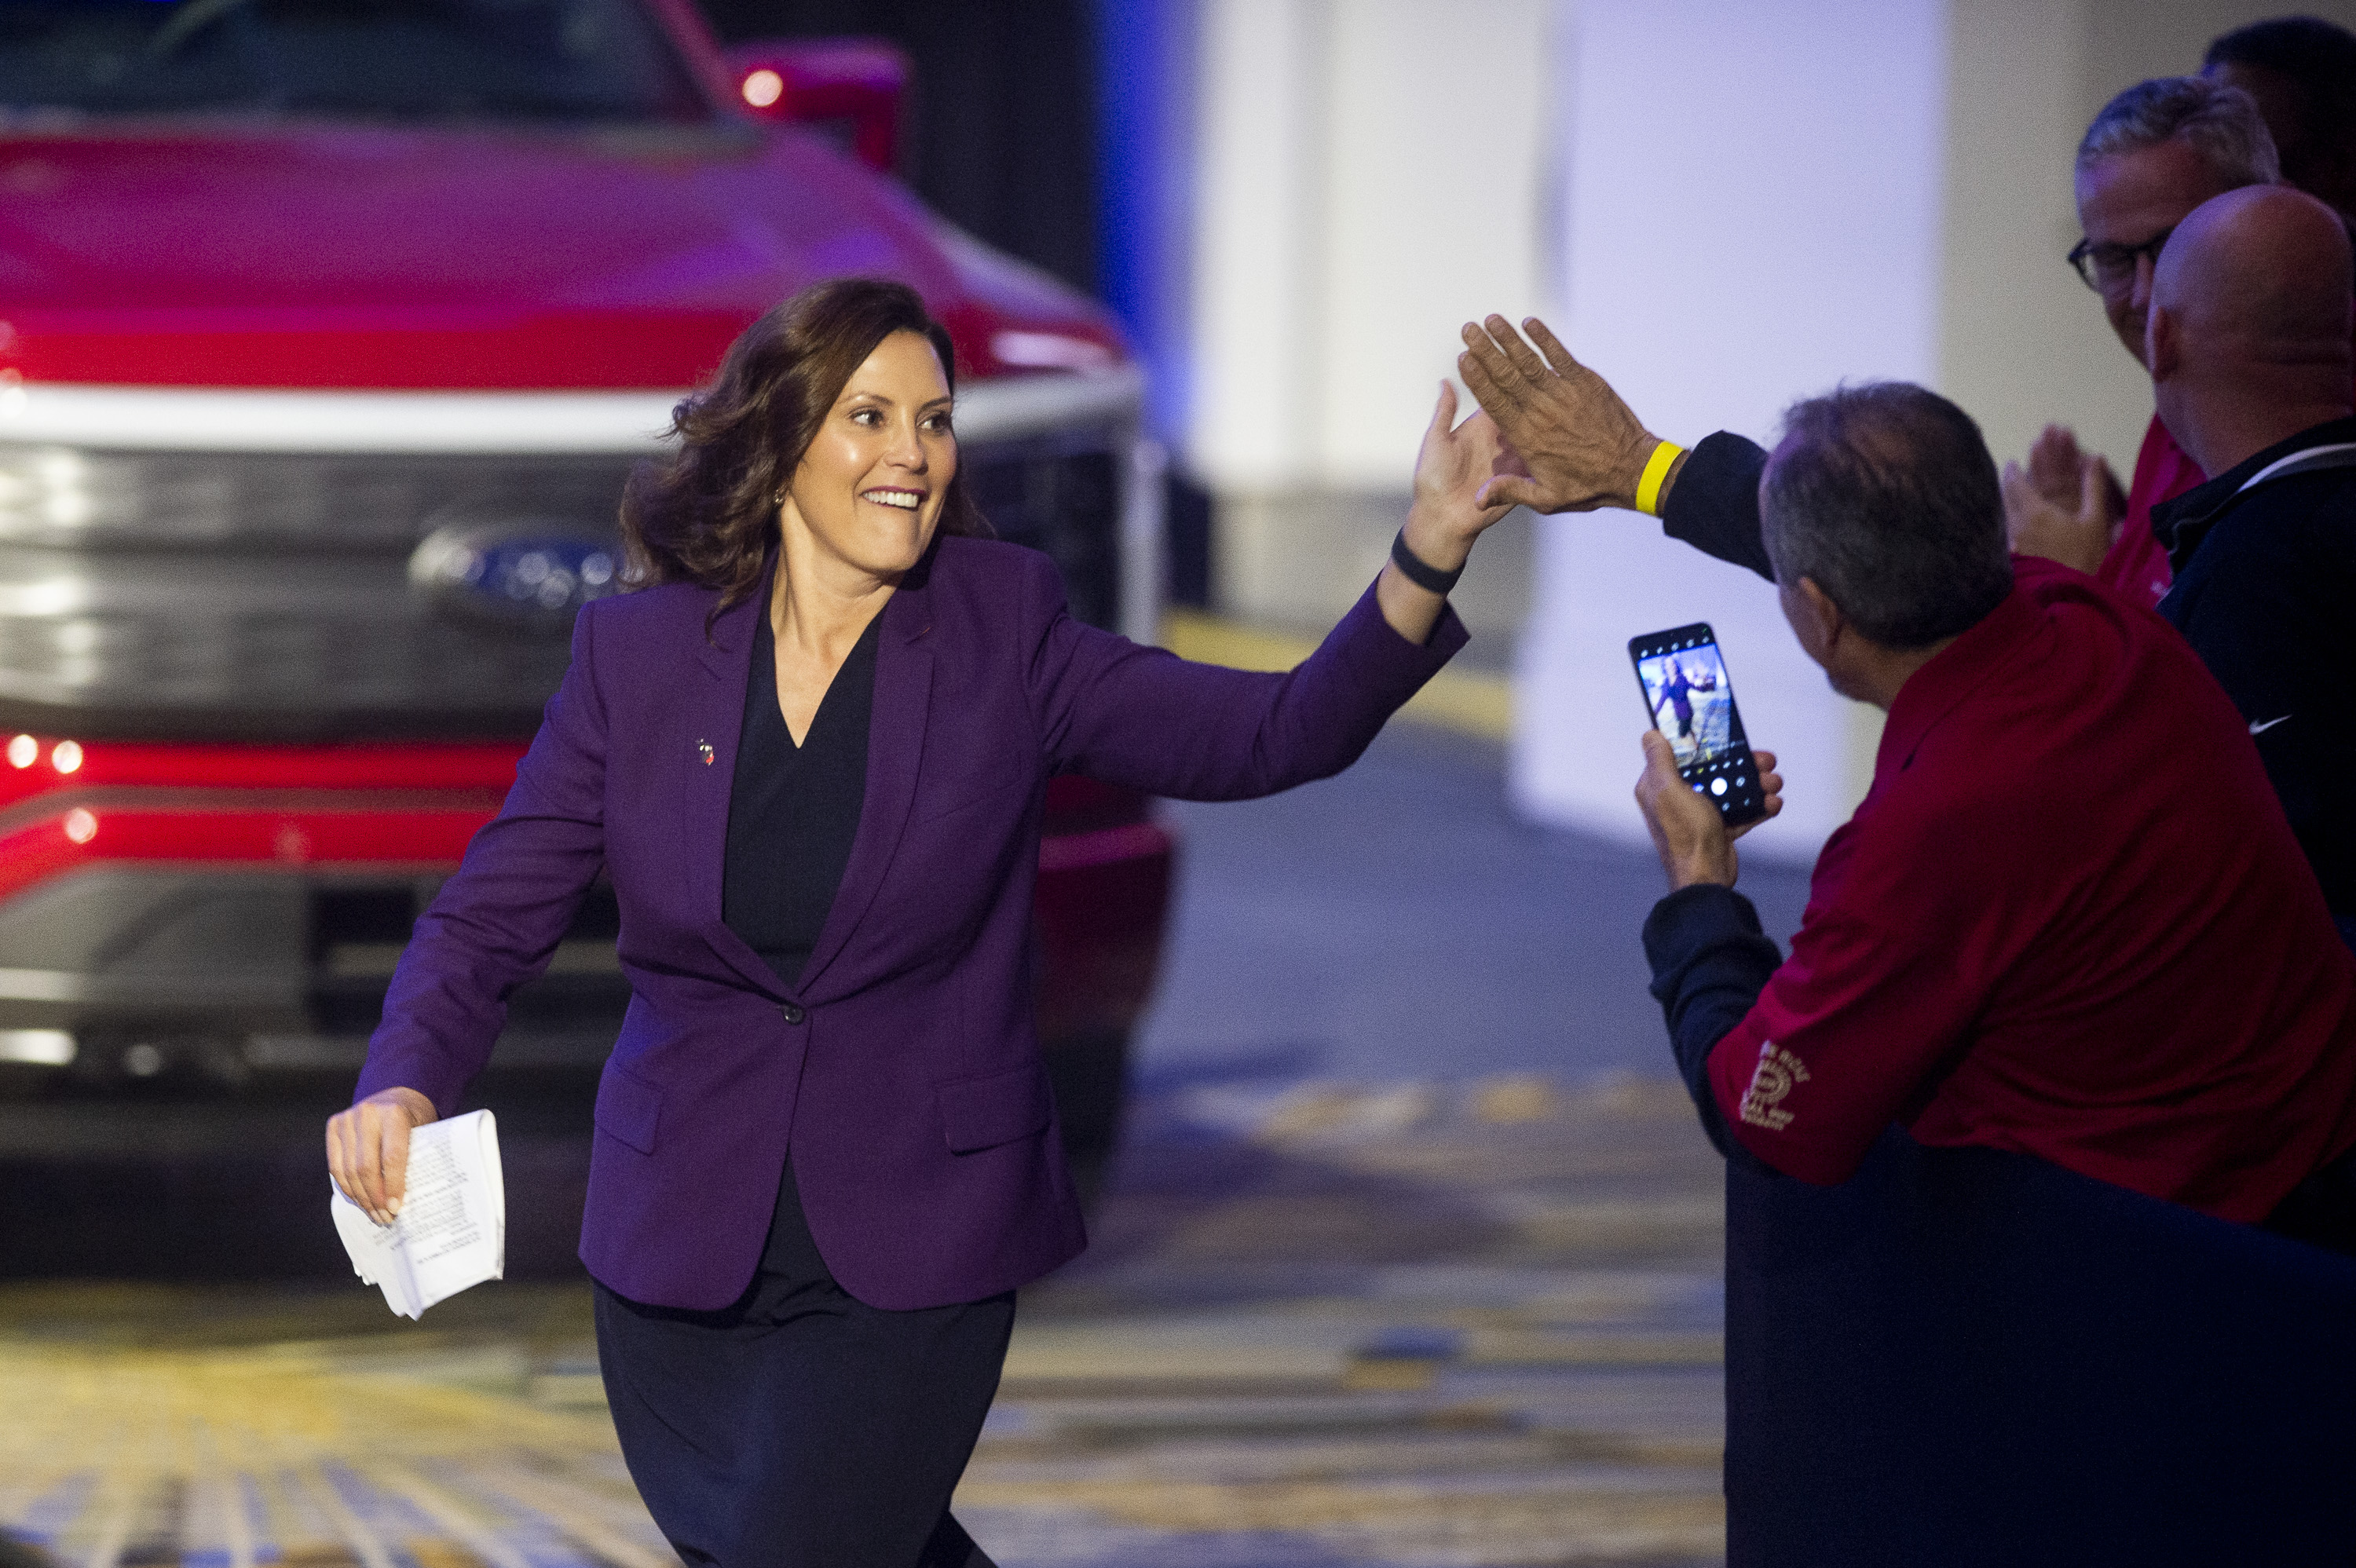 Michigan Gov. Gretchen Whitmer greets supporters during the 2022 North American International Auto Show at Huntington Place in Detroit on Wednesday, Sept. 14 2022.